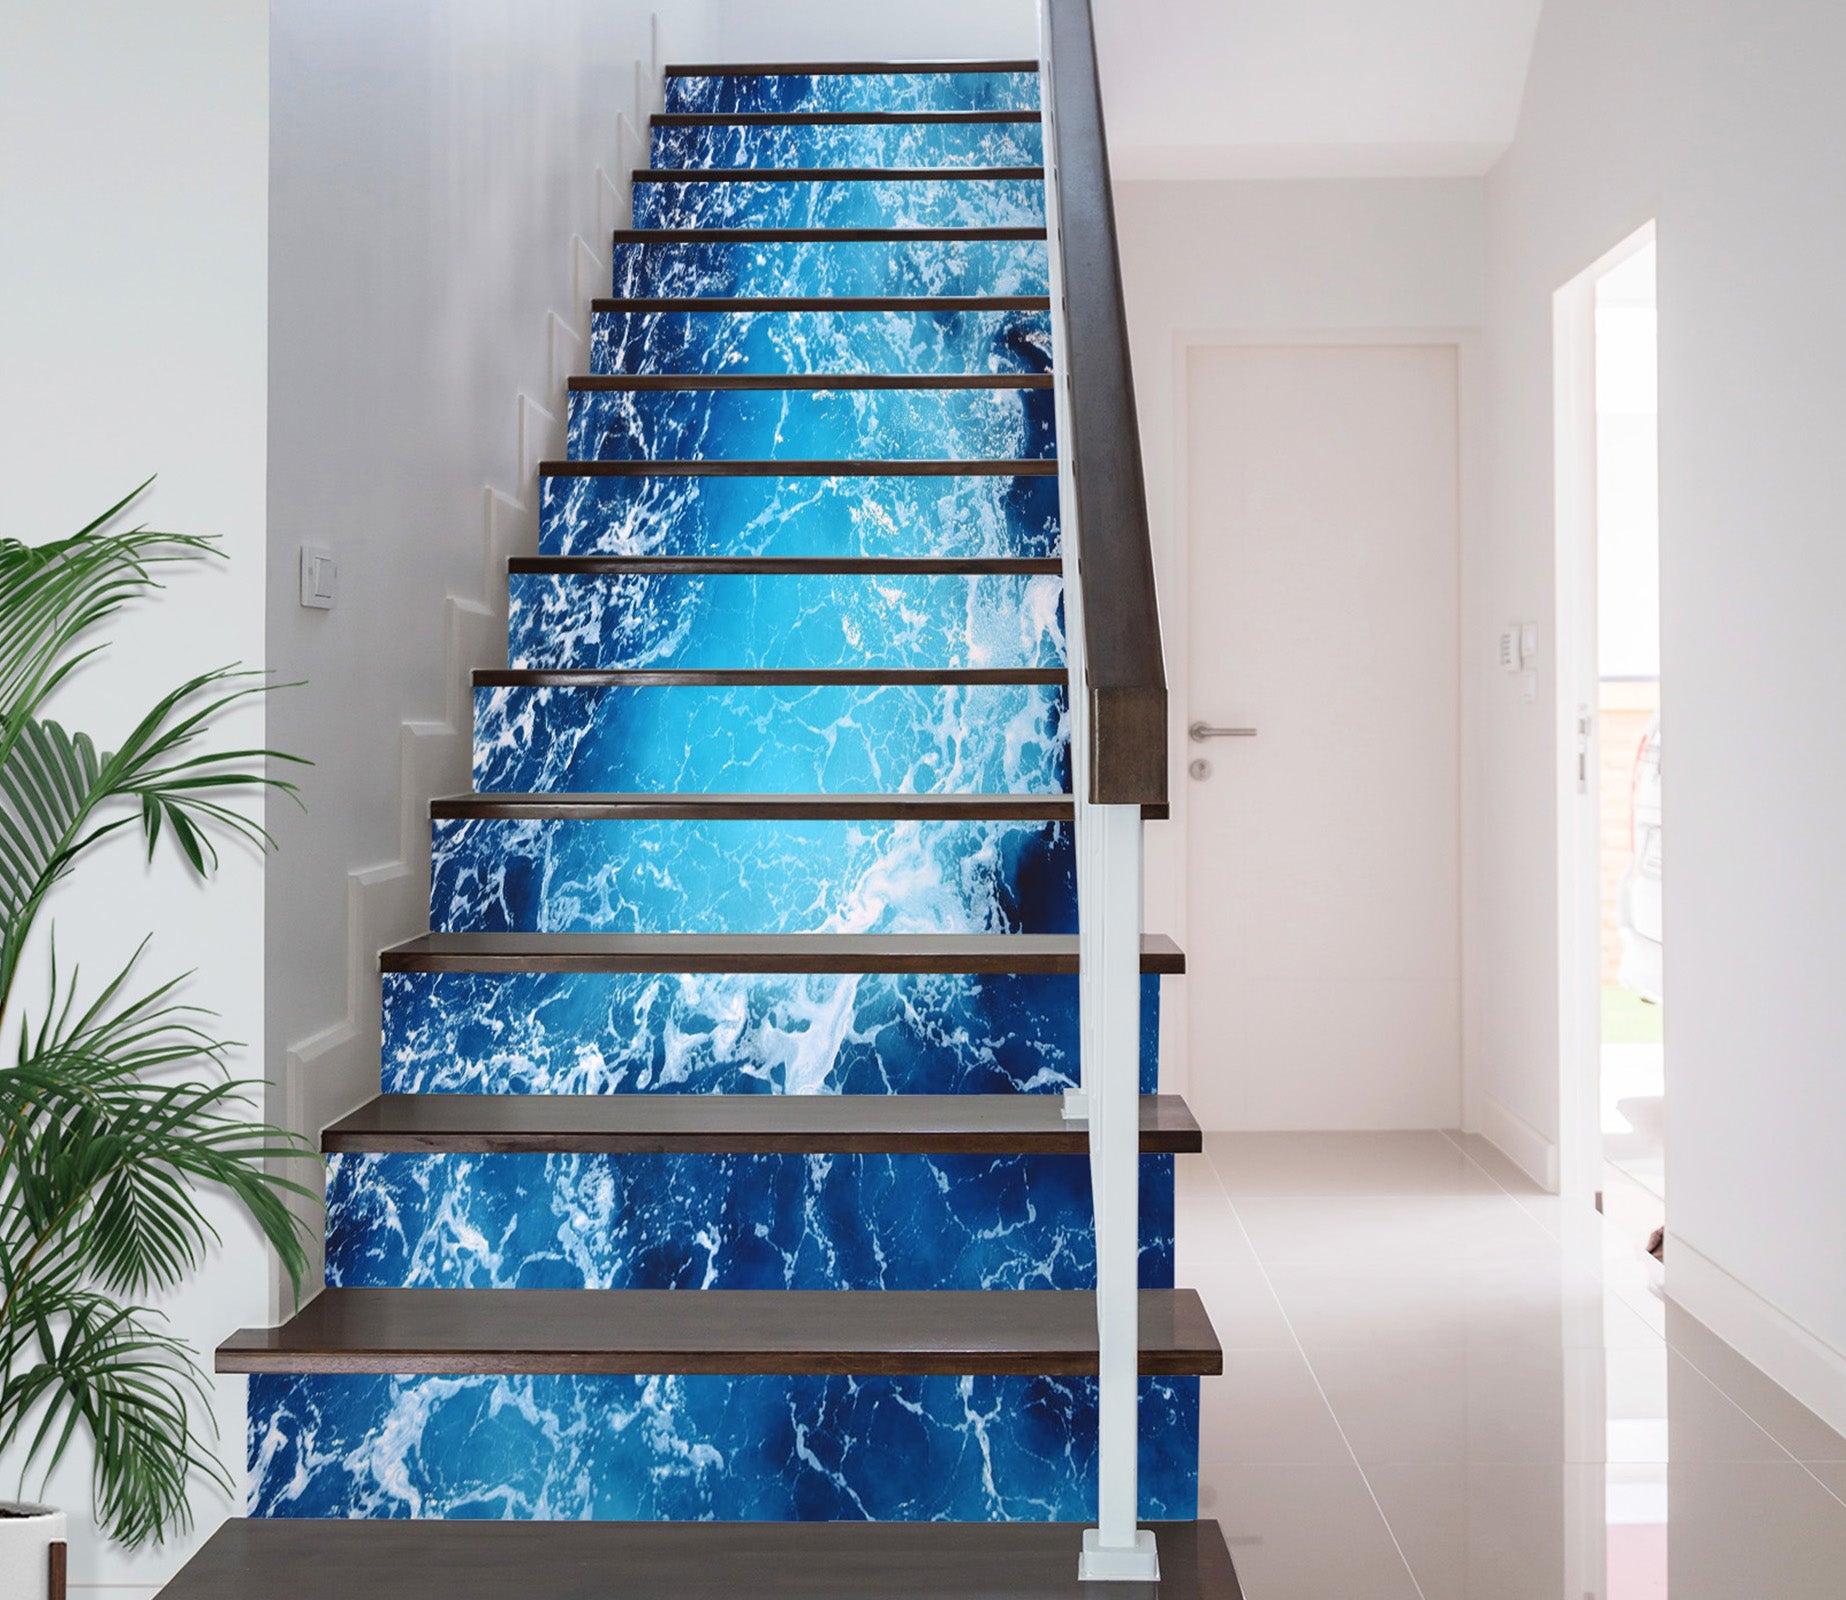 3D Tranquil Blue Lake 638 Stair Risers